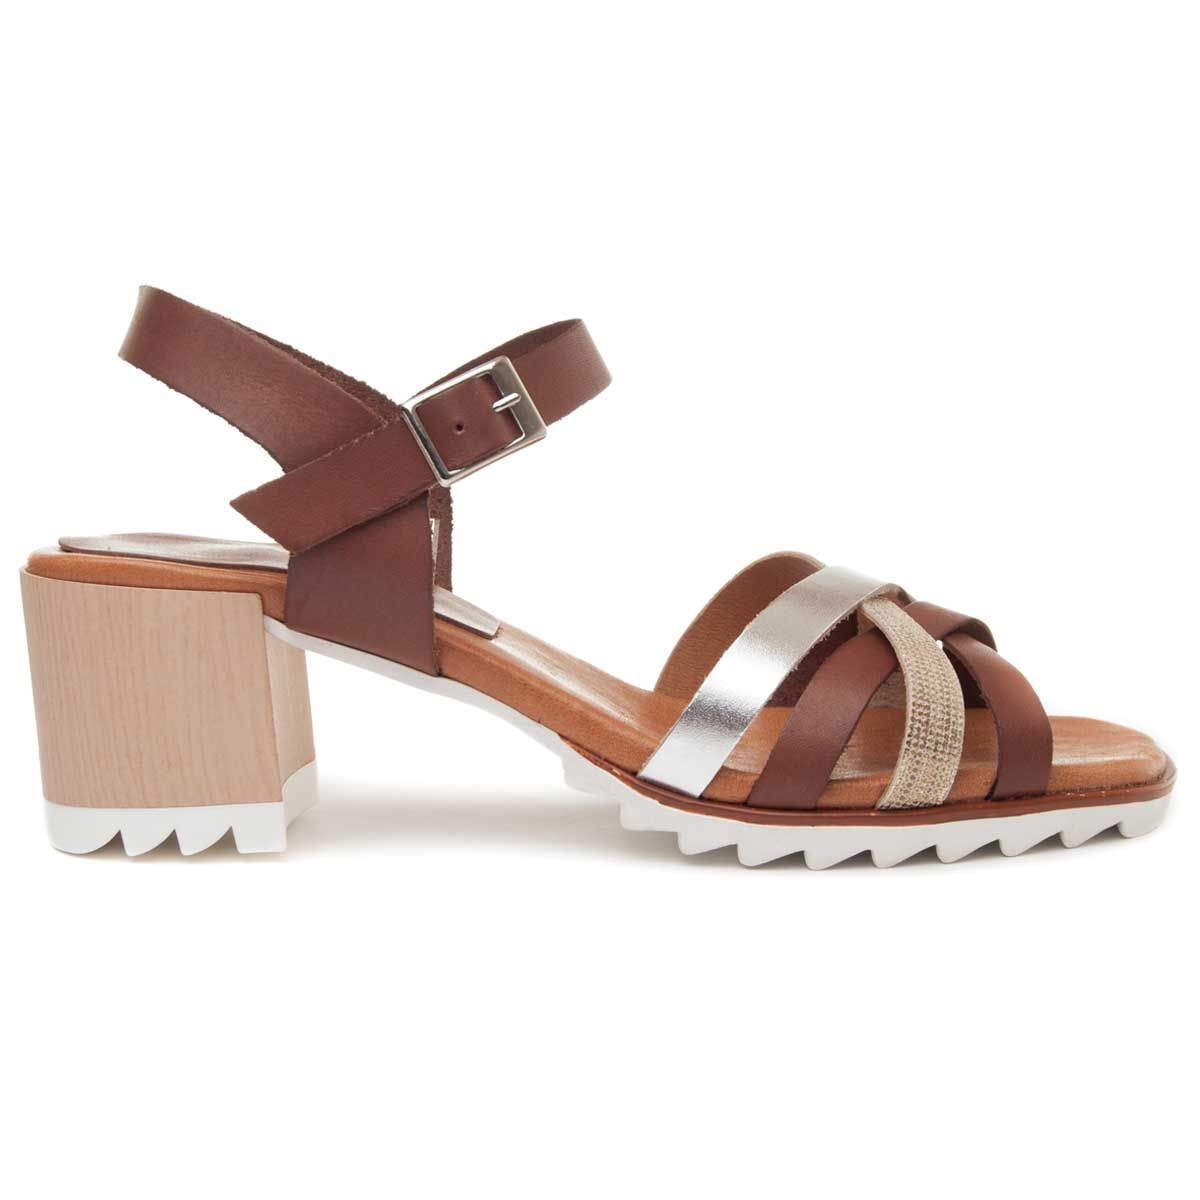 These new sandals meet everything you need to make your summer perfect. Perfect combination between quality, community and design. Manufactured 100% in leather, with padded plant also made of skin and non-slip and light polyurethane sole, nothing weigh. Its combinations of colors and textures make these sandals unique pieces very top and easy to combine. Natural, Ergonomic, Flexible, Footprint Effect, Soft, Absorbent, Breathable, Shock Absorbing, Lightweight and Anti-slip..Description Technical: External MaterialNatural LeatherMaterial Interior: Natural Leather.Material Plant: Natural Leather.Material Sole: Polyurethane. . East Platform: 2.Balture Tacon: 0.Ture Bag0.Proofundity Bag